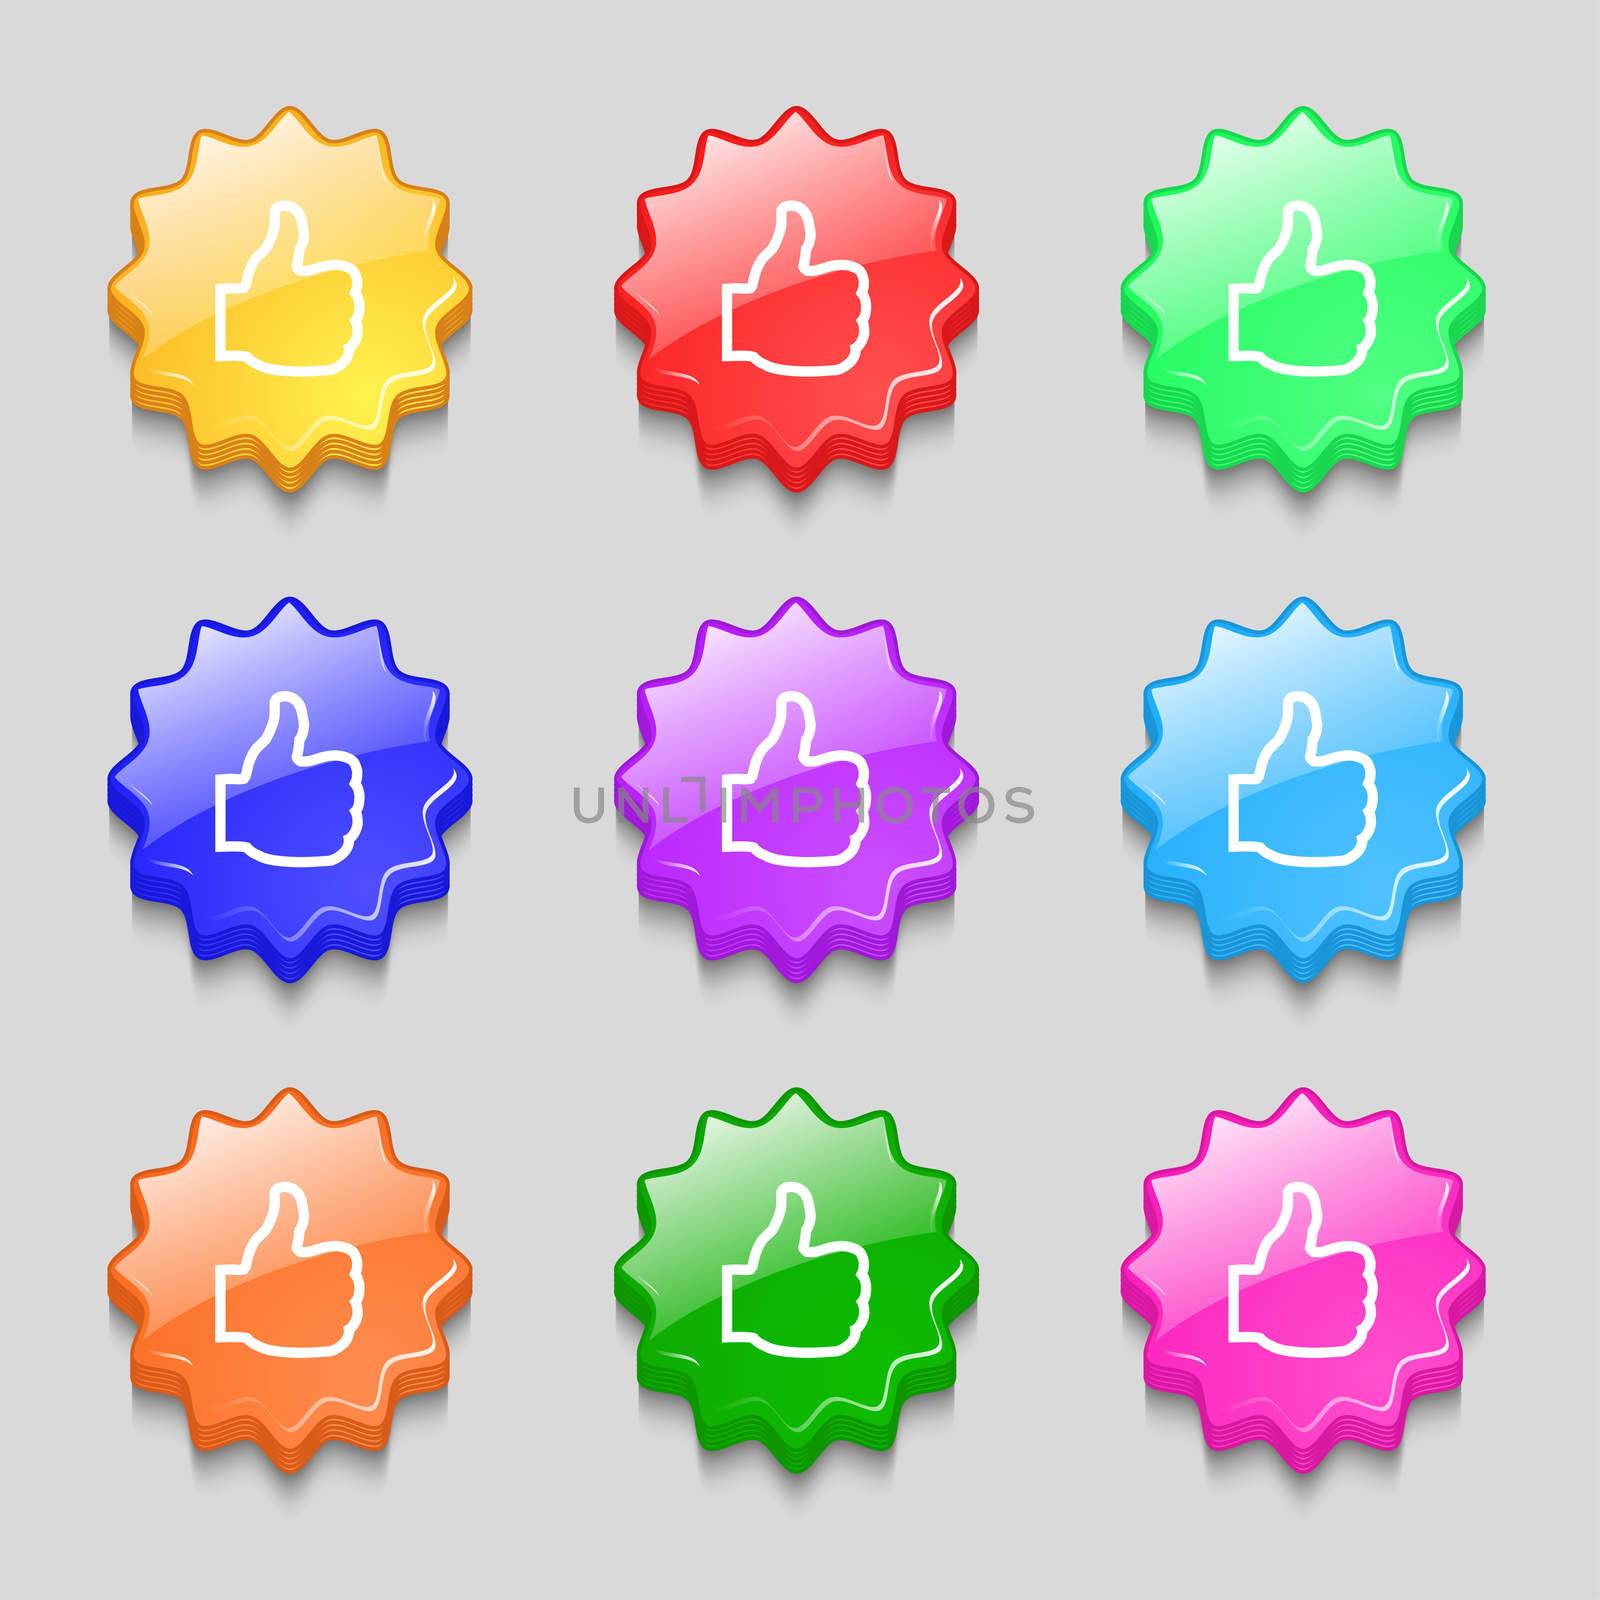 Like icon sign. symbol on nine wavy colourful buttons. illustration